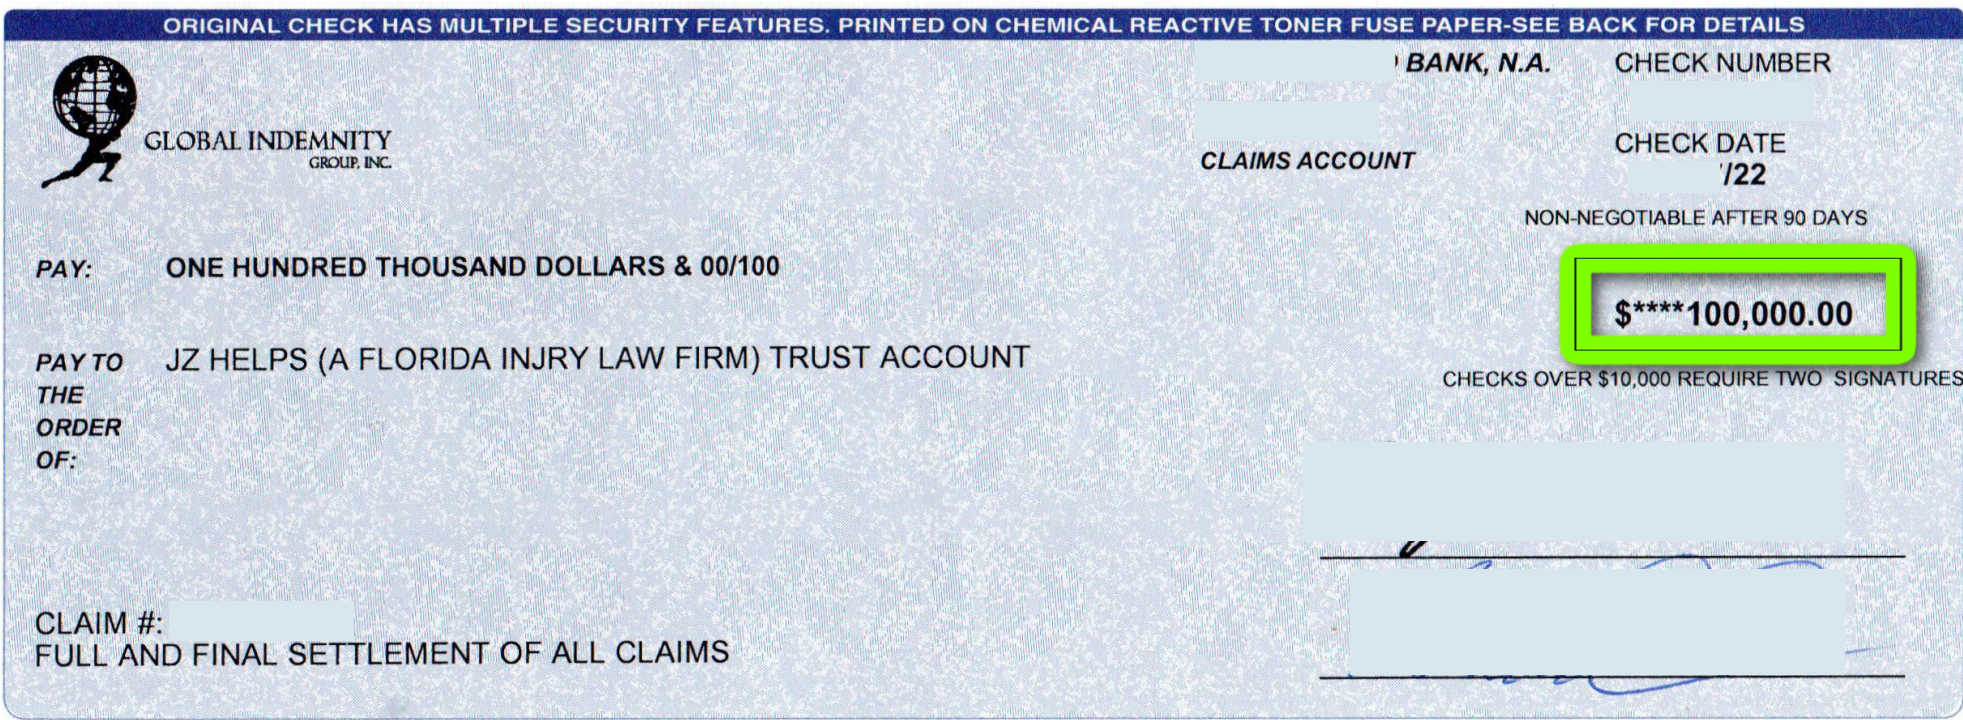 Global Indemnity Group, Inc $100,000 settlement check to JZ helps (a Florida injury law firm)